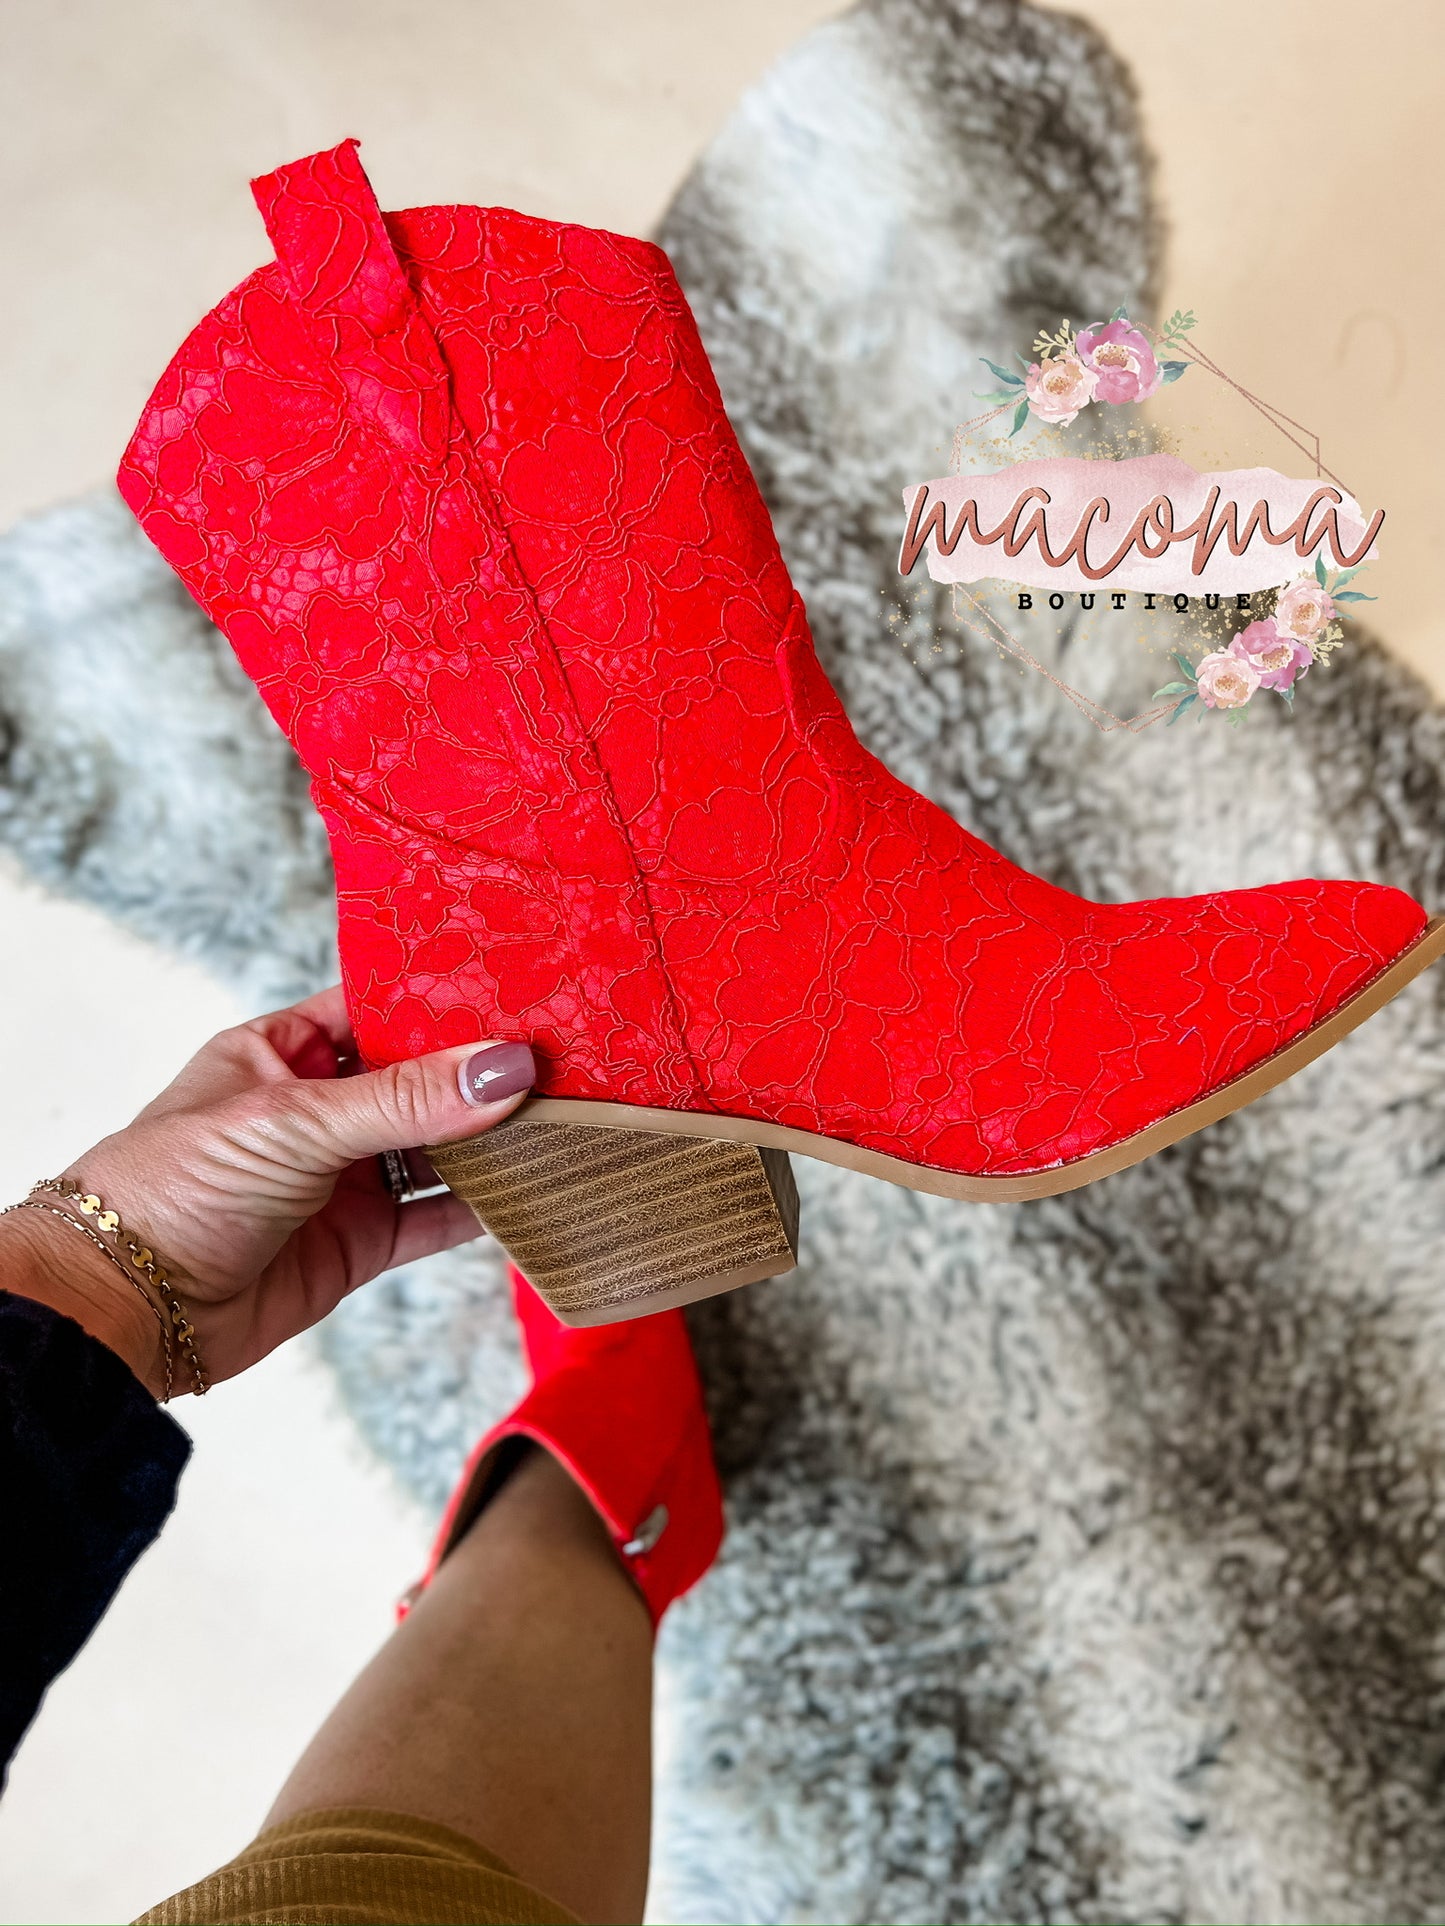 Corky's Red Lace Rowdy Boots- FINAL SALE